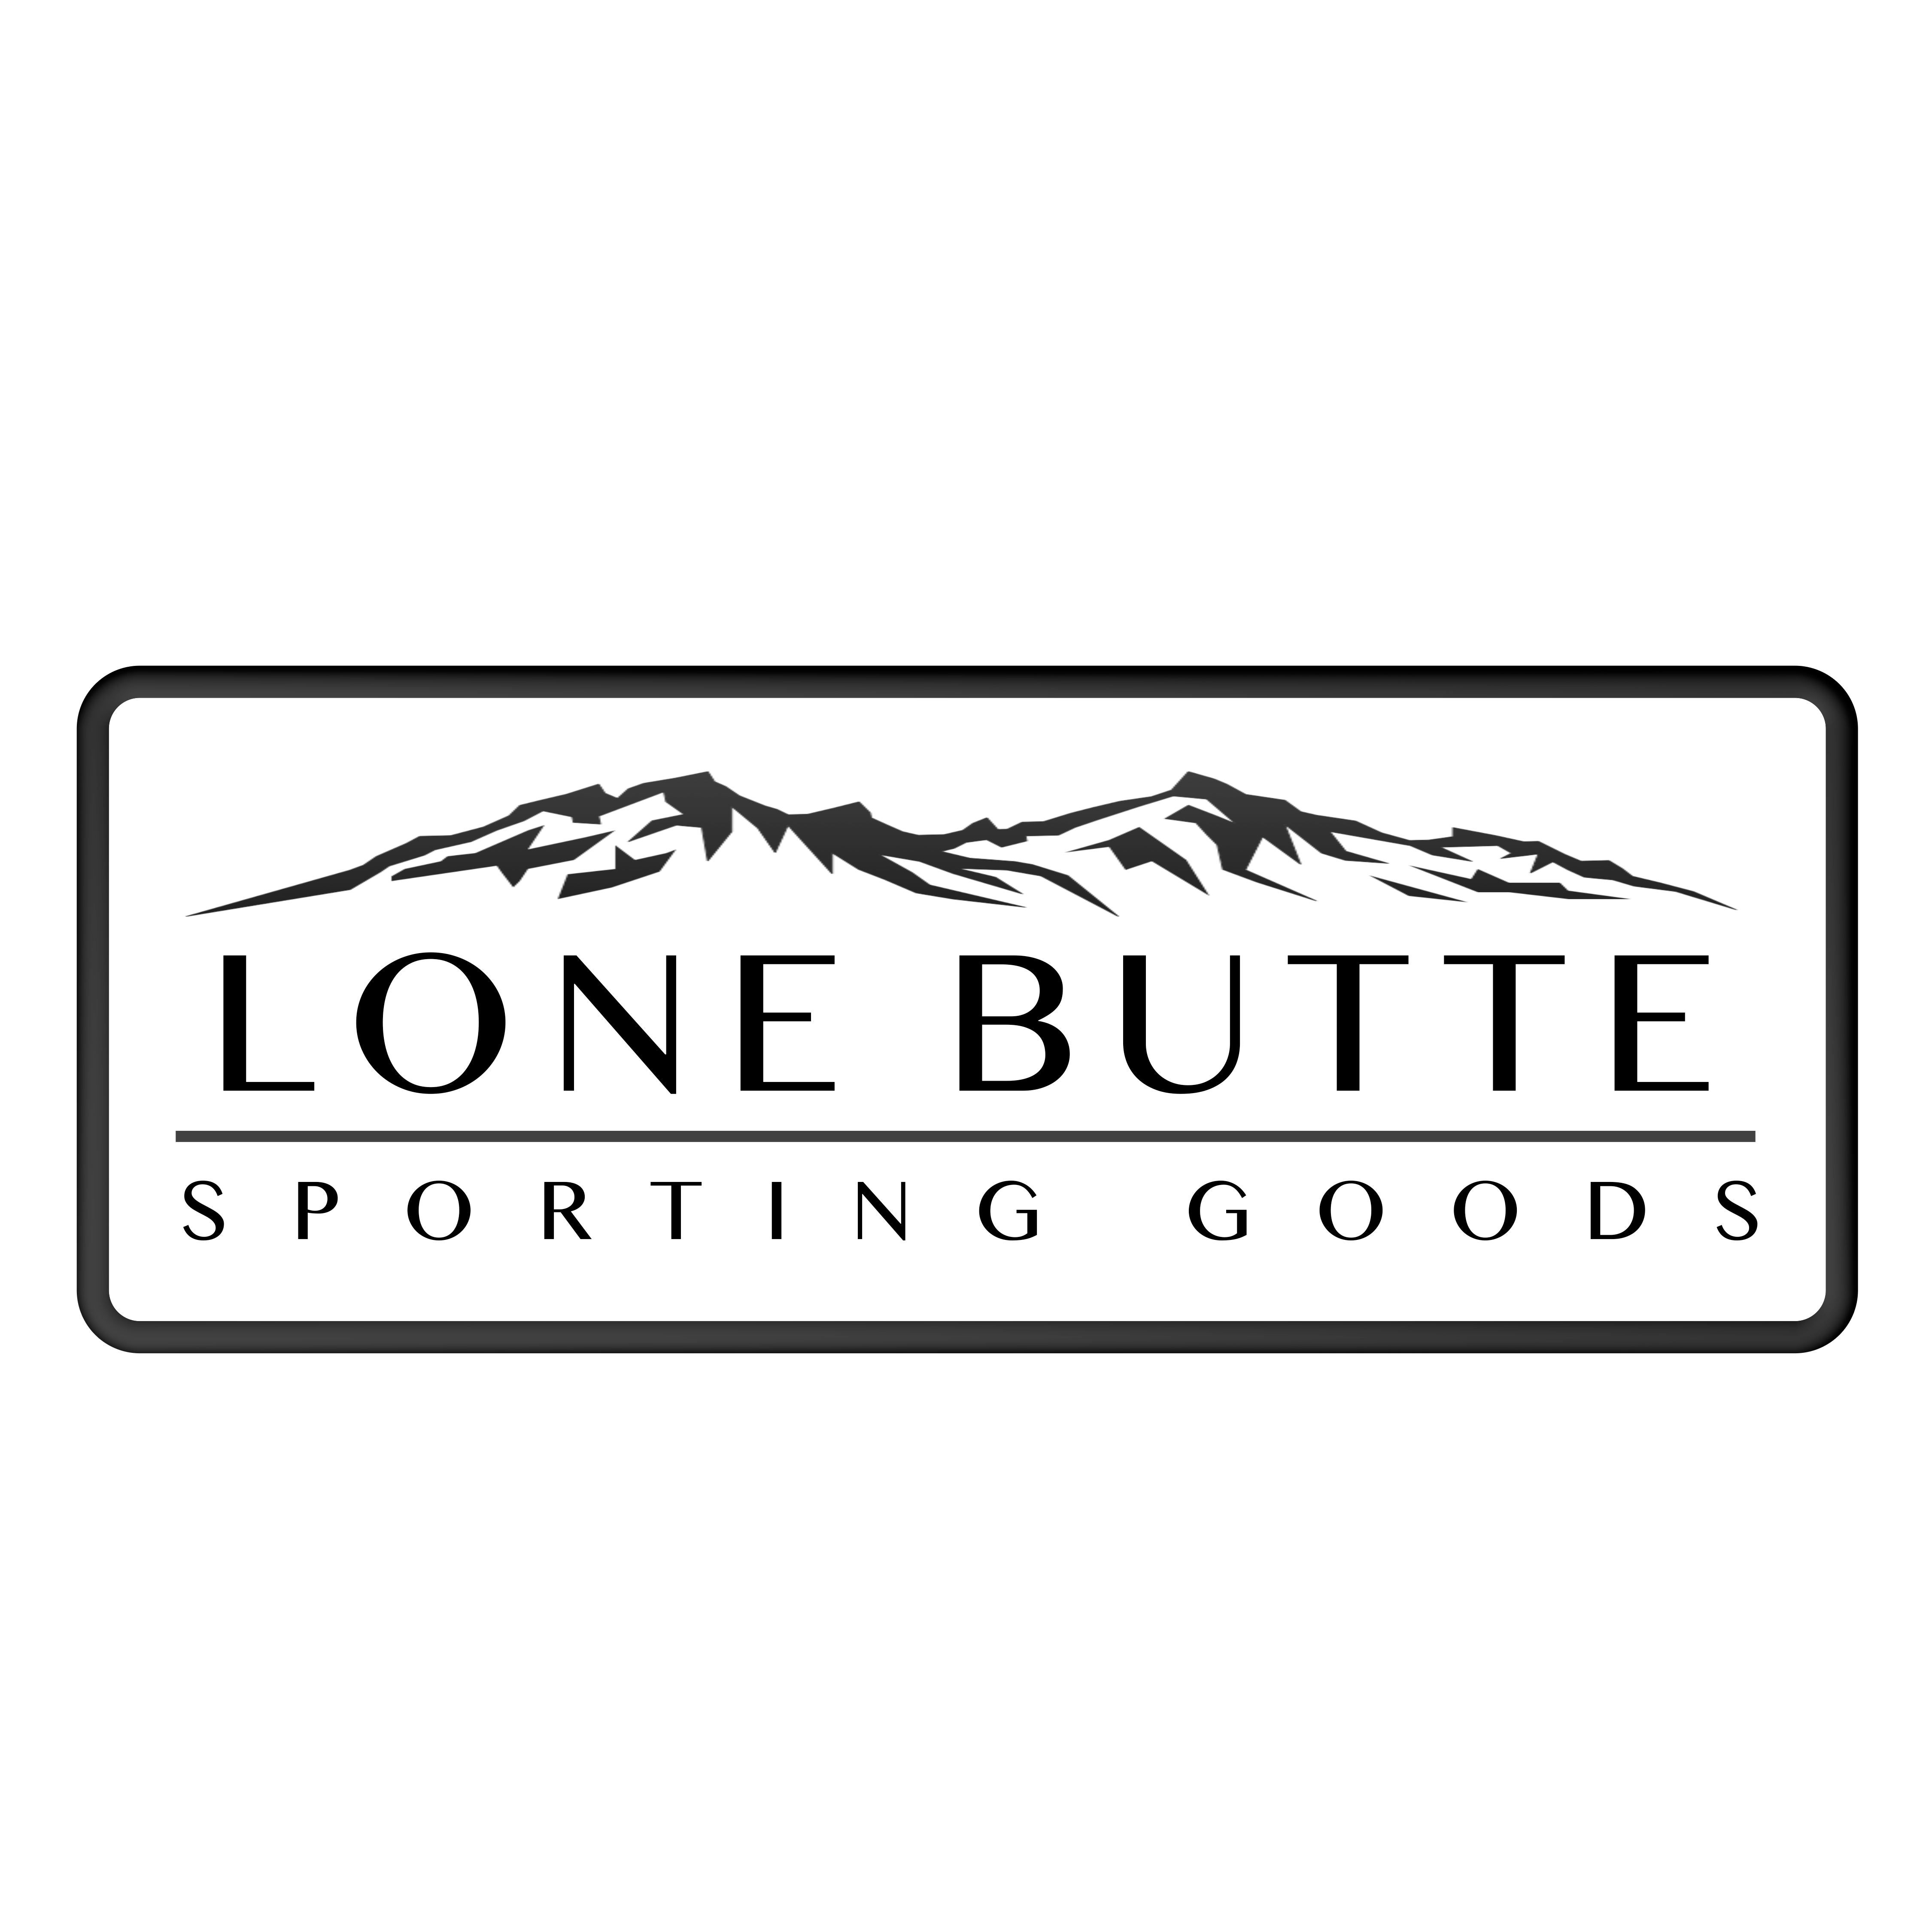 Lone Butte Sporting Goods